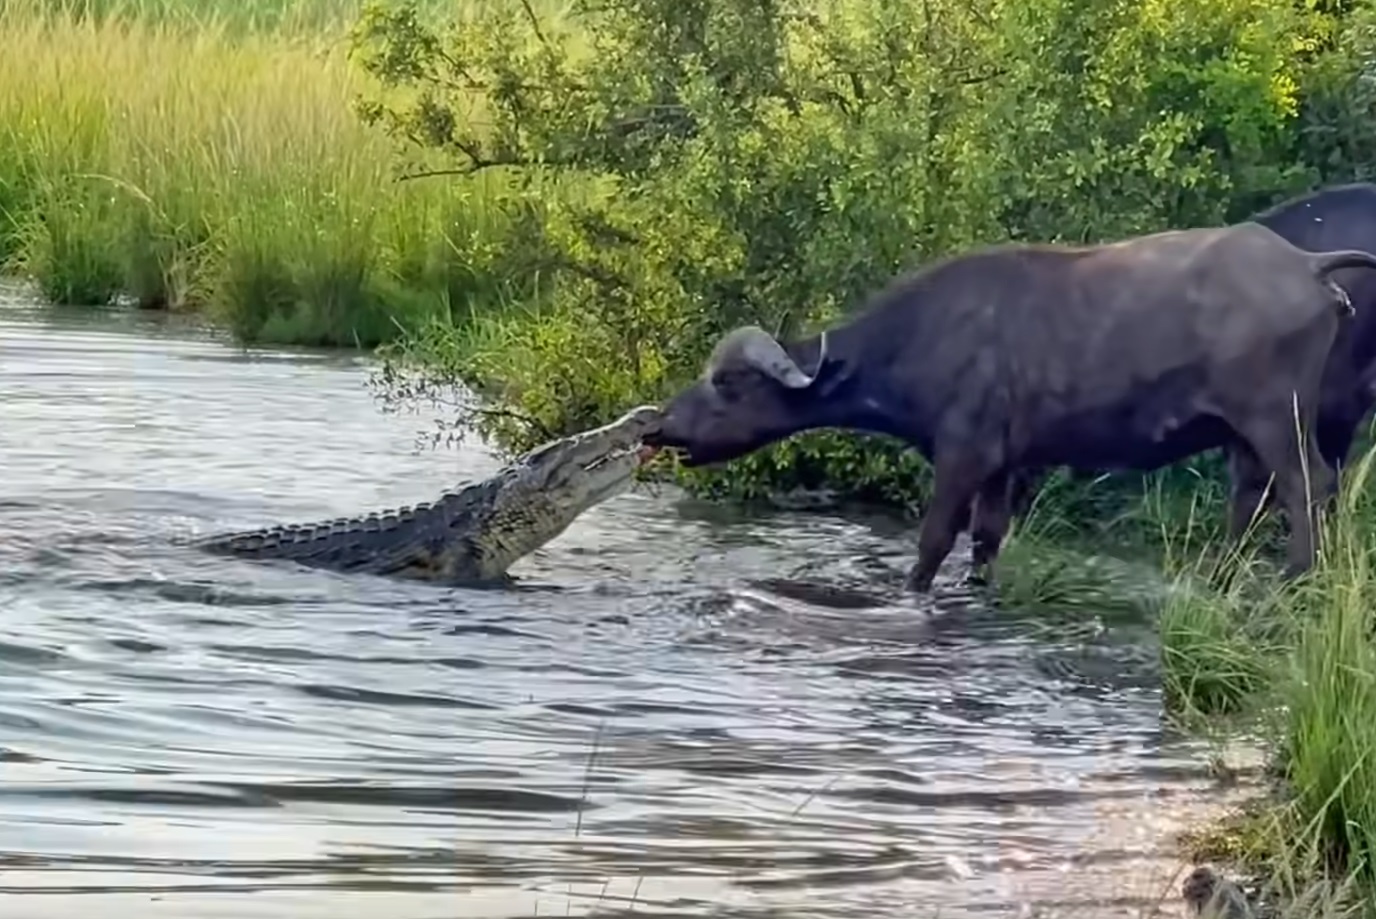 Buffalo Bravely Drags Croc Out Water In Struggle To Get Away